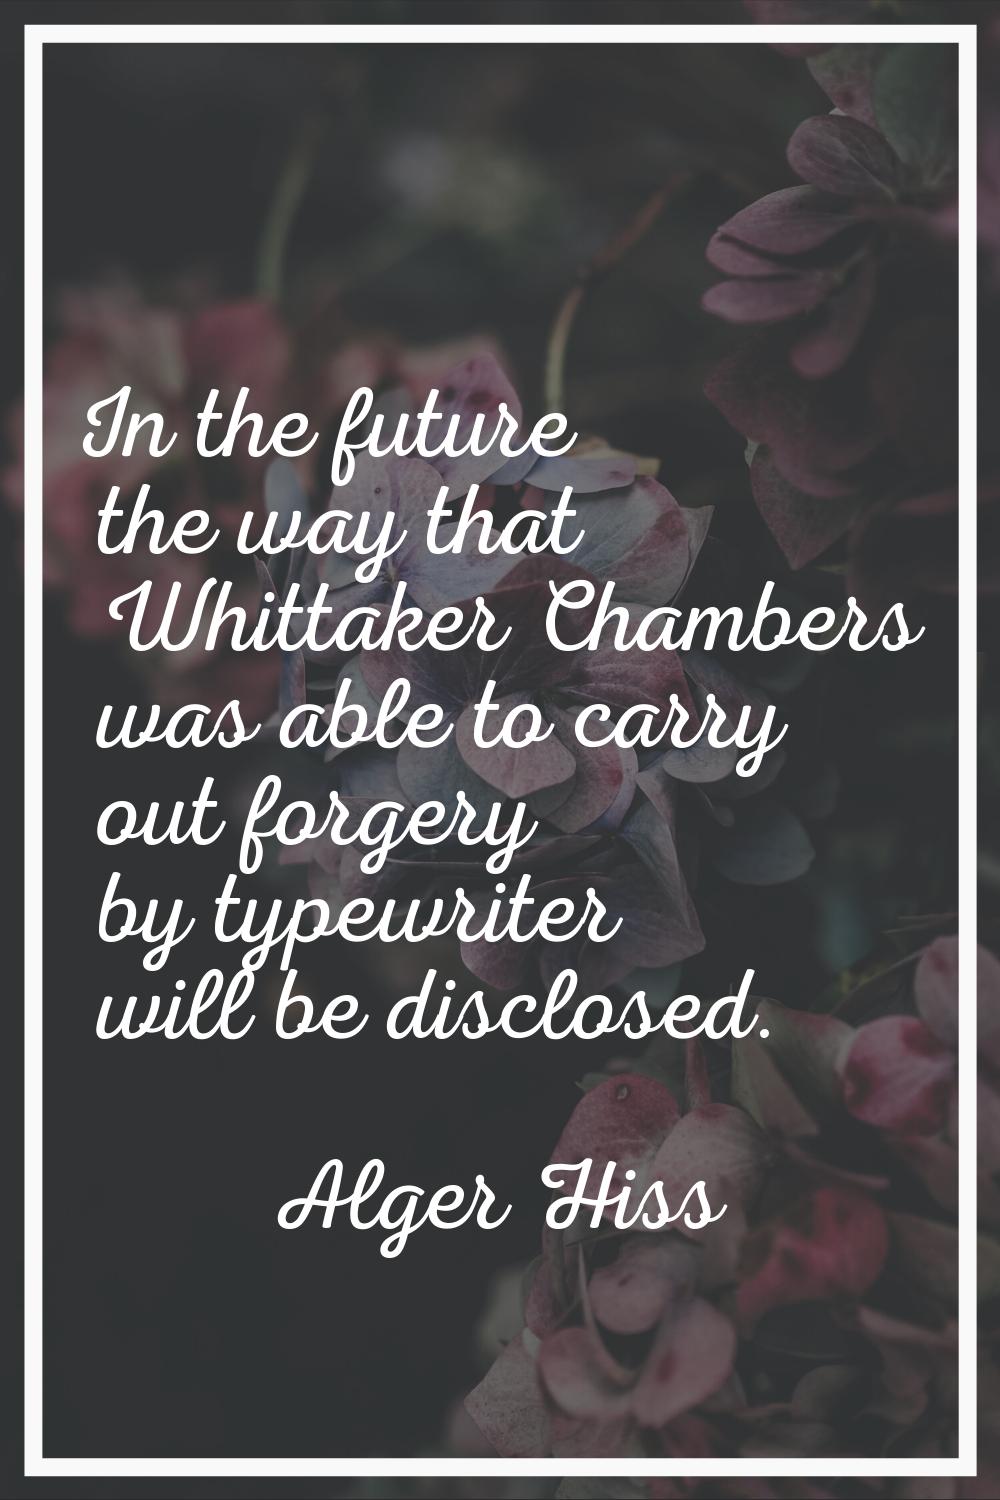 In the future the way that Whittaker Chambers was able to carry out forgery by typewriter will be d